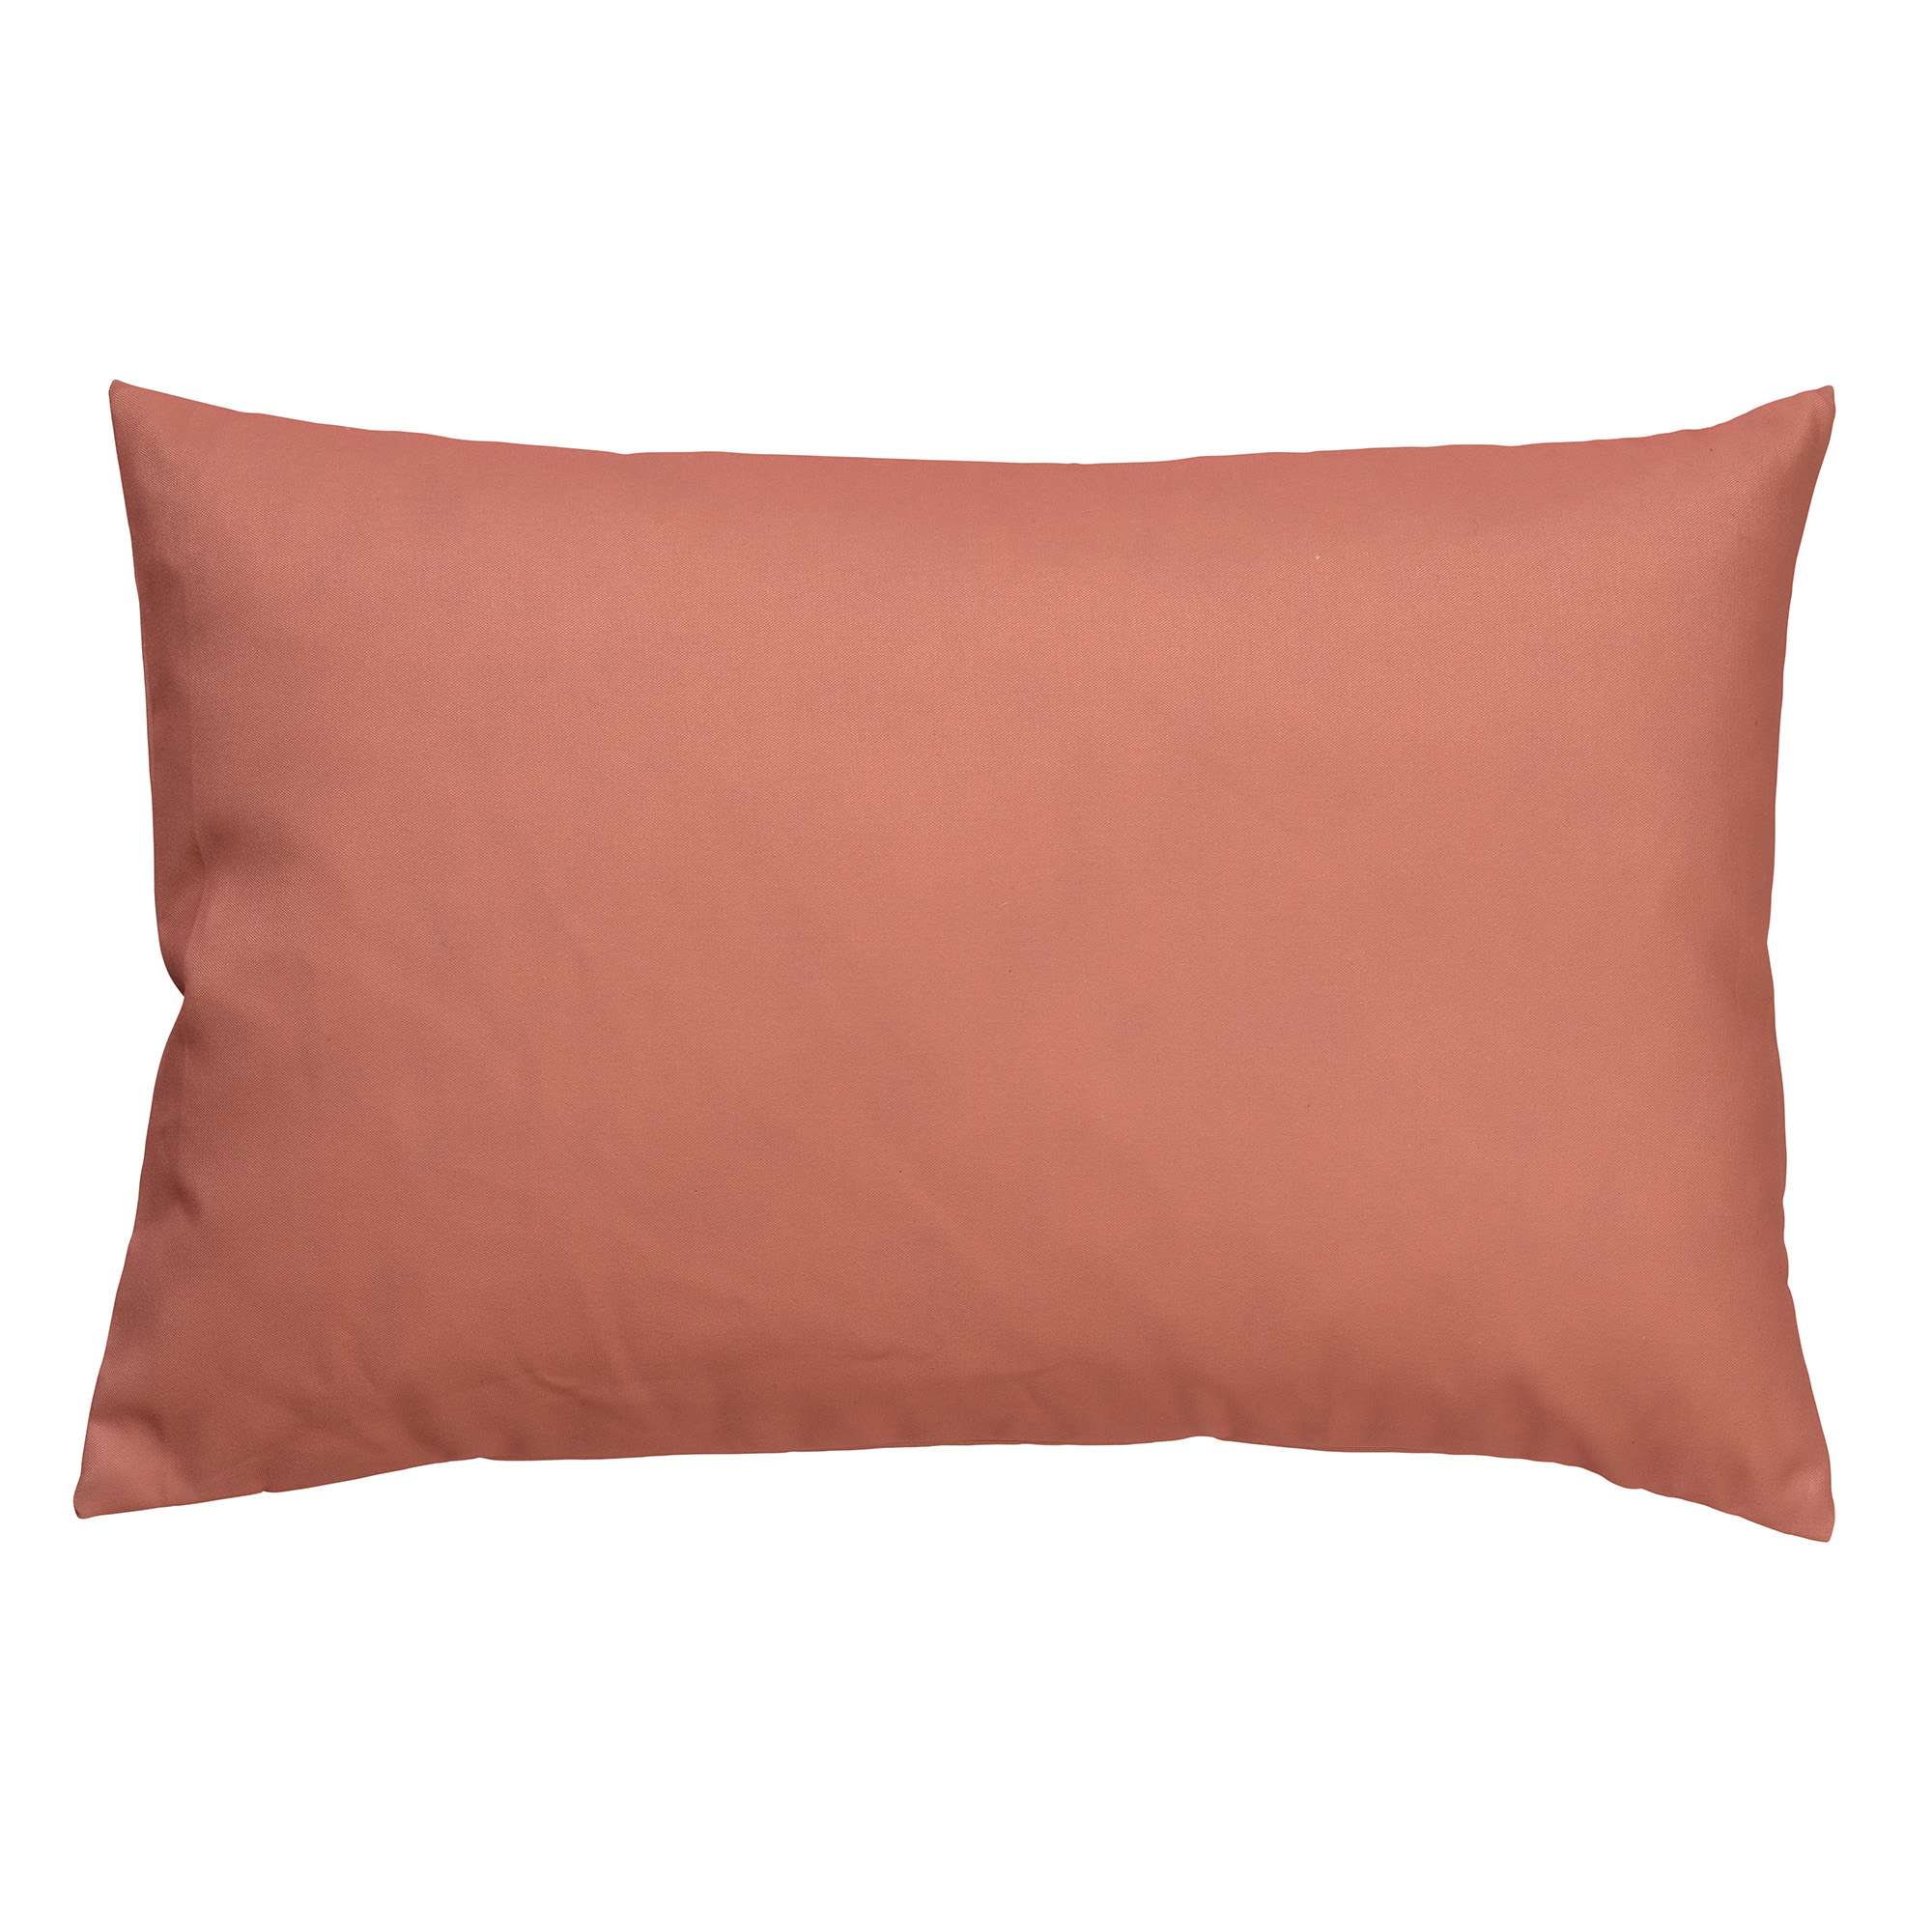 Cushion Santorini 40x60 cm Muted Clay - water-repellent and UV-resistant